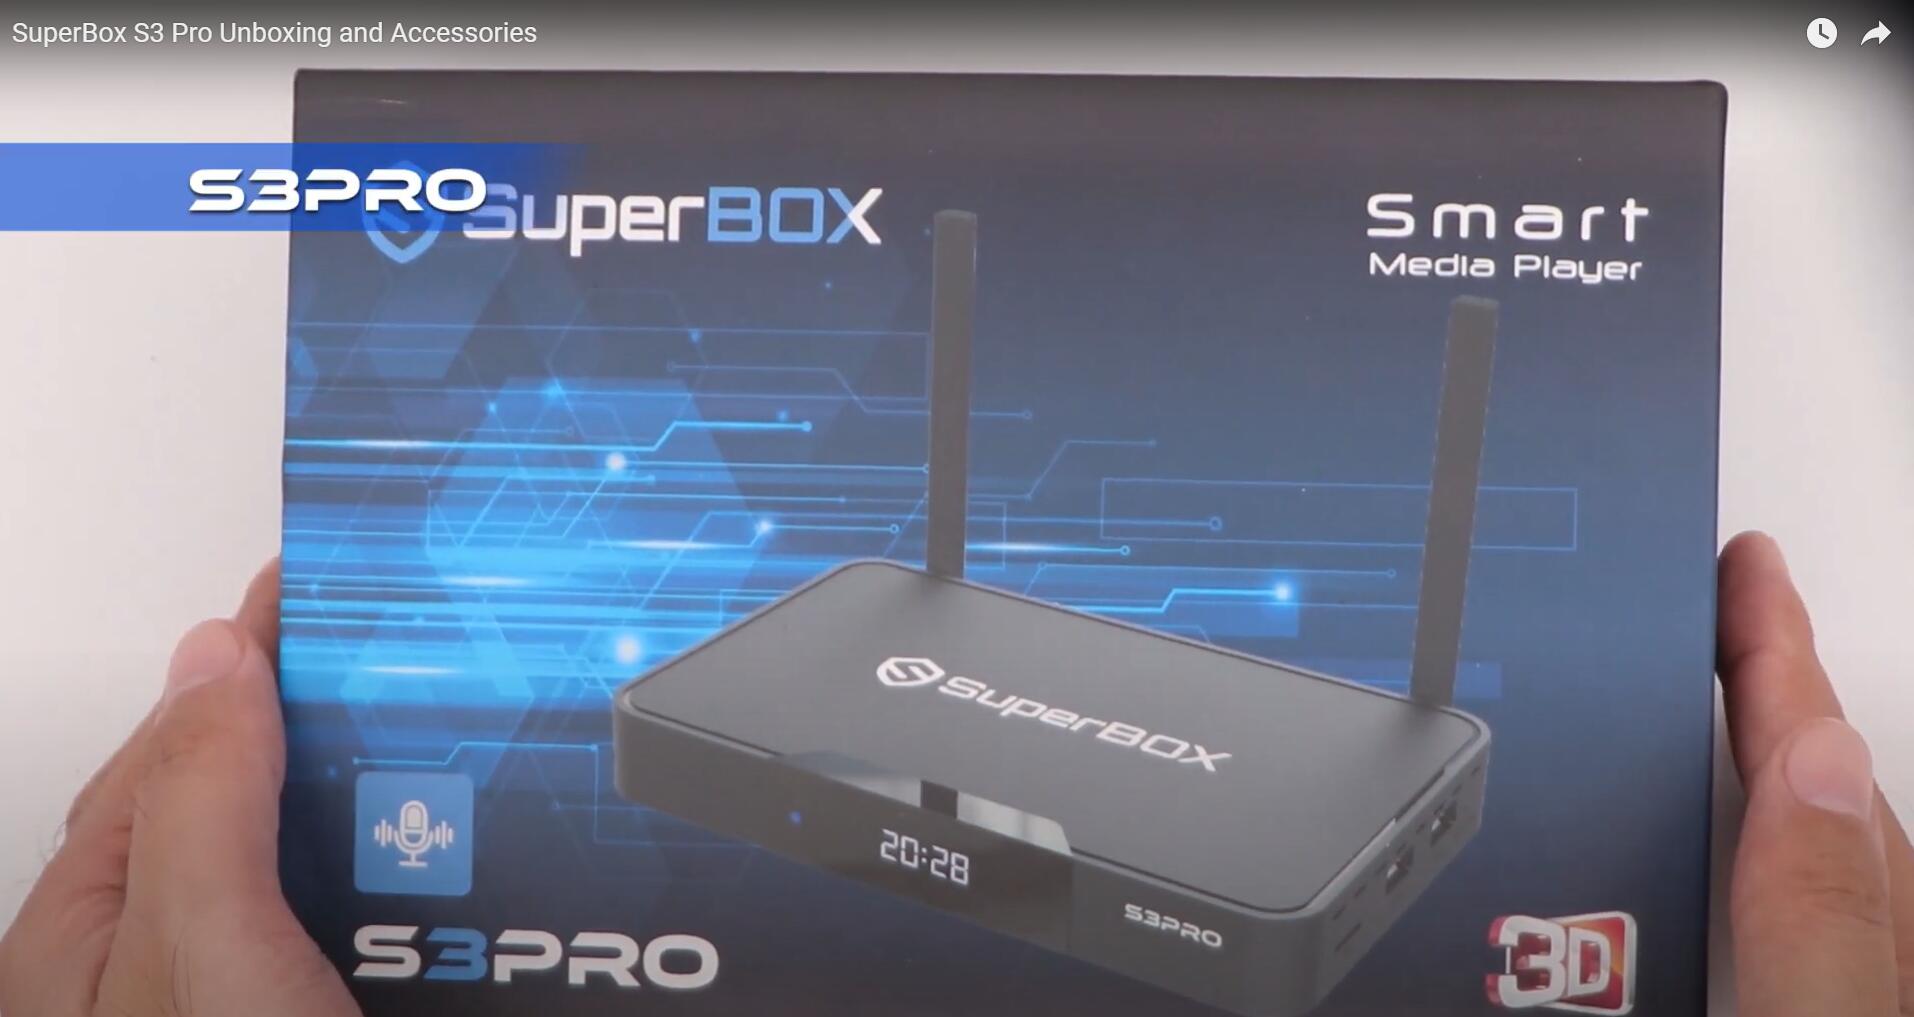 SuperBox S3 Pro Unboxing and Accessories